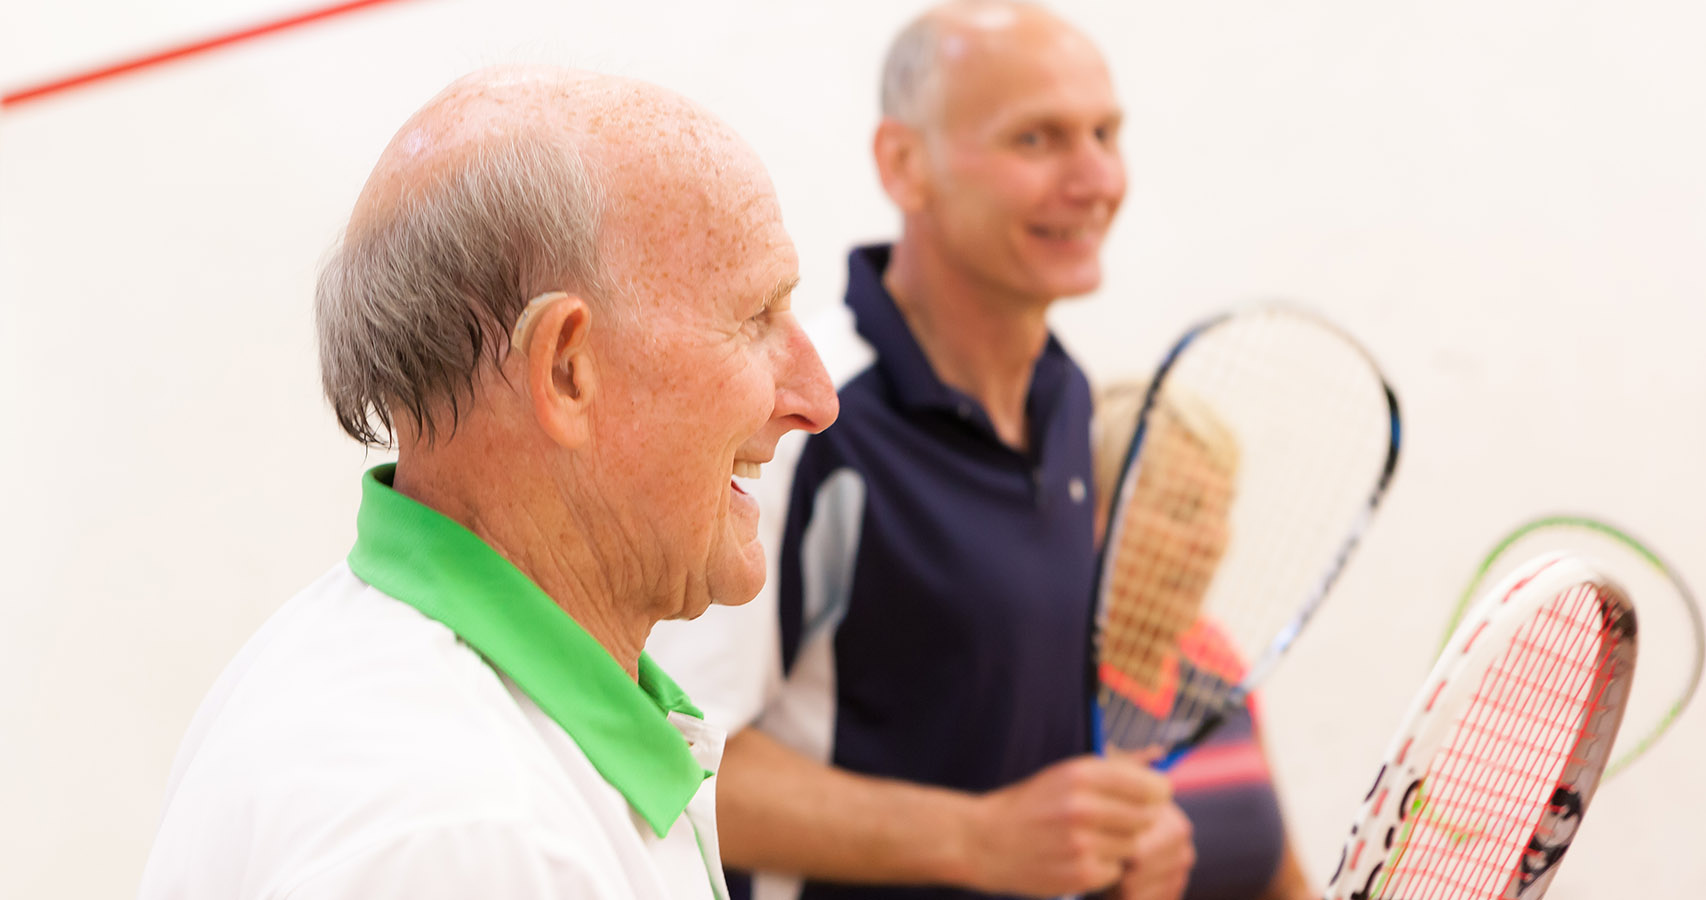 Man with a hearing aid on a squash court